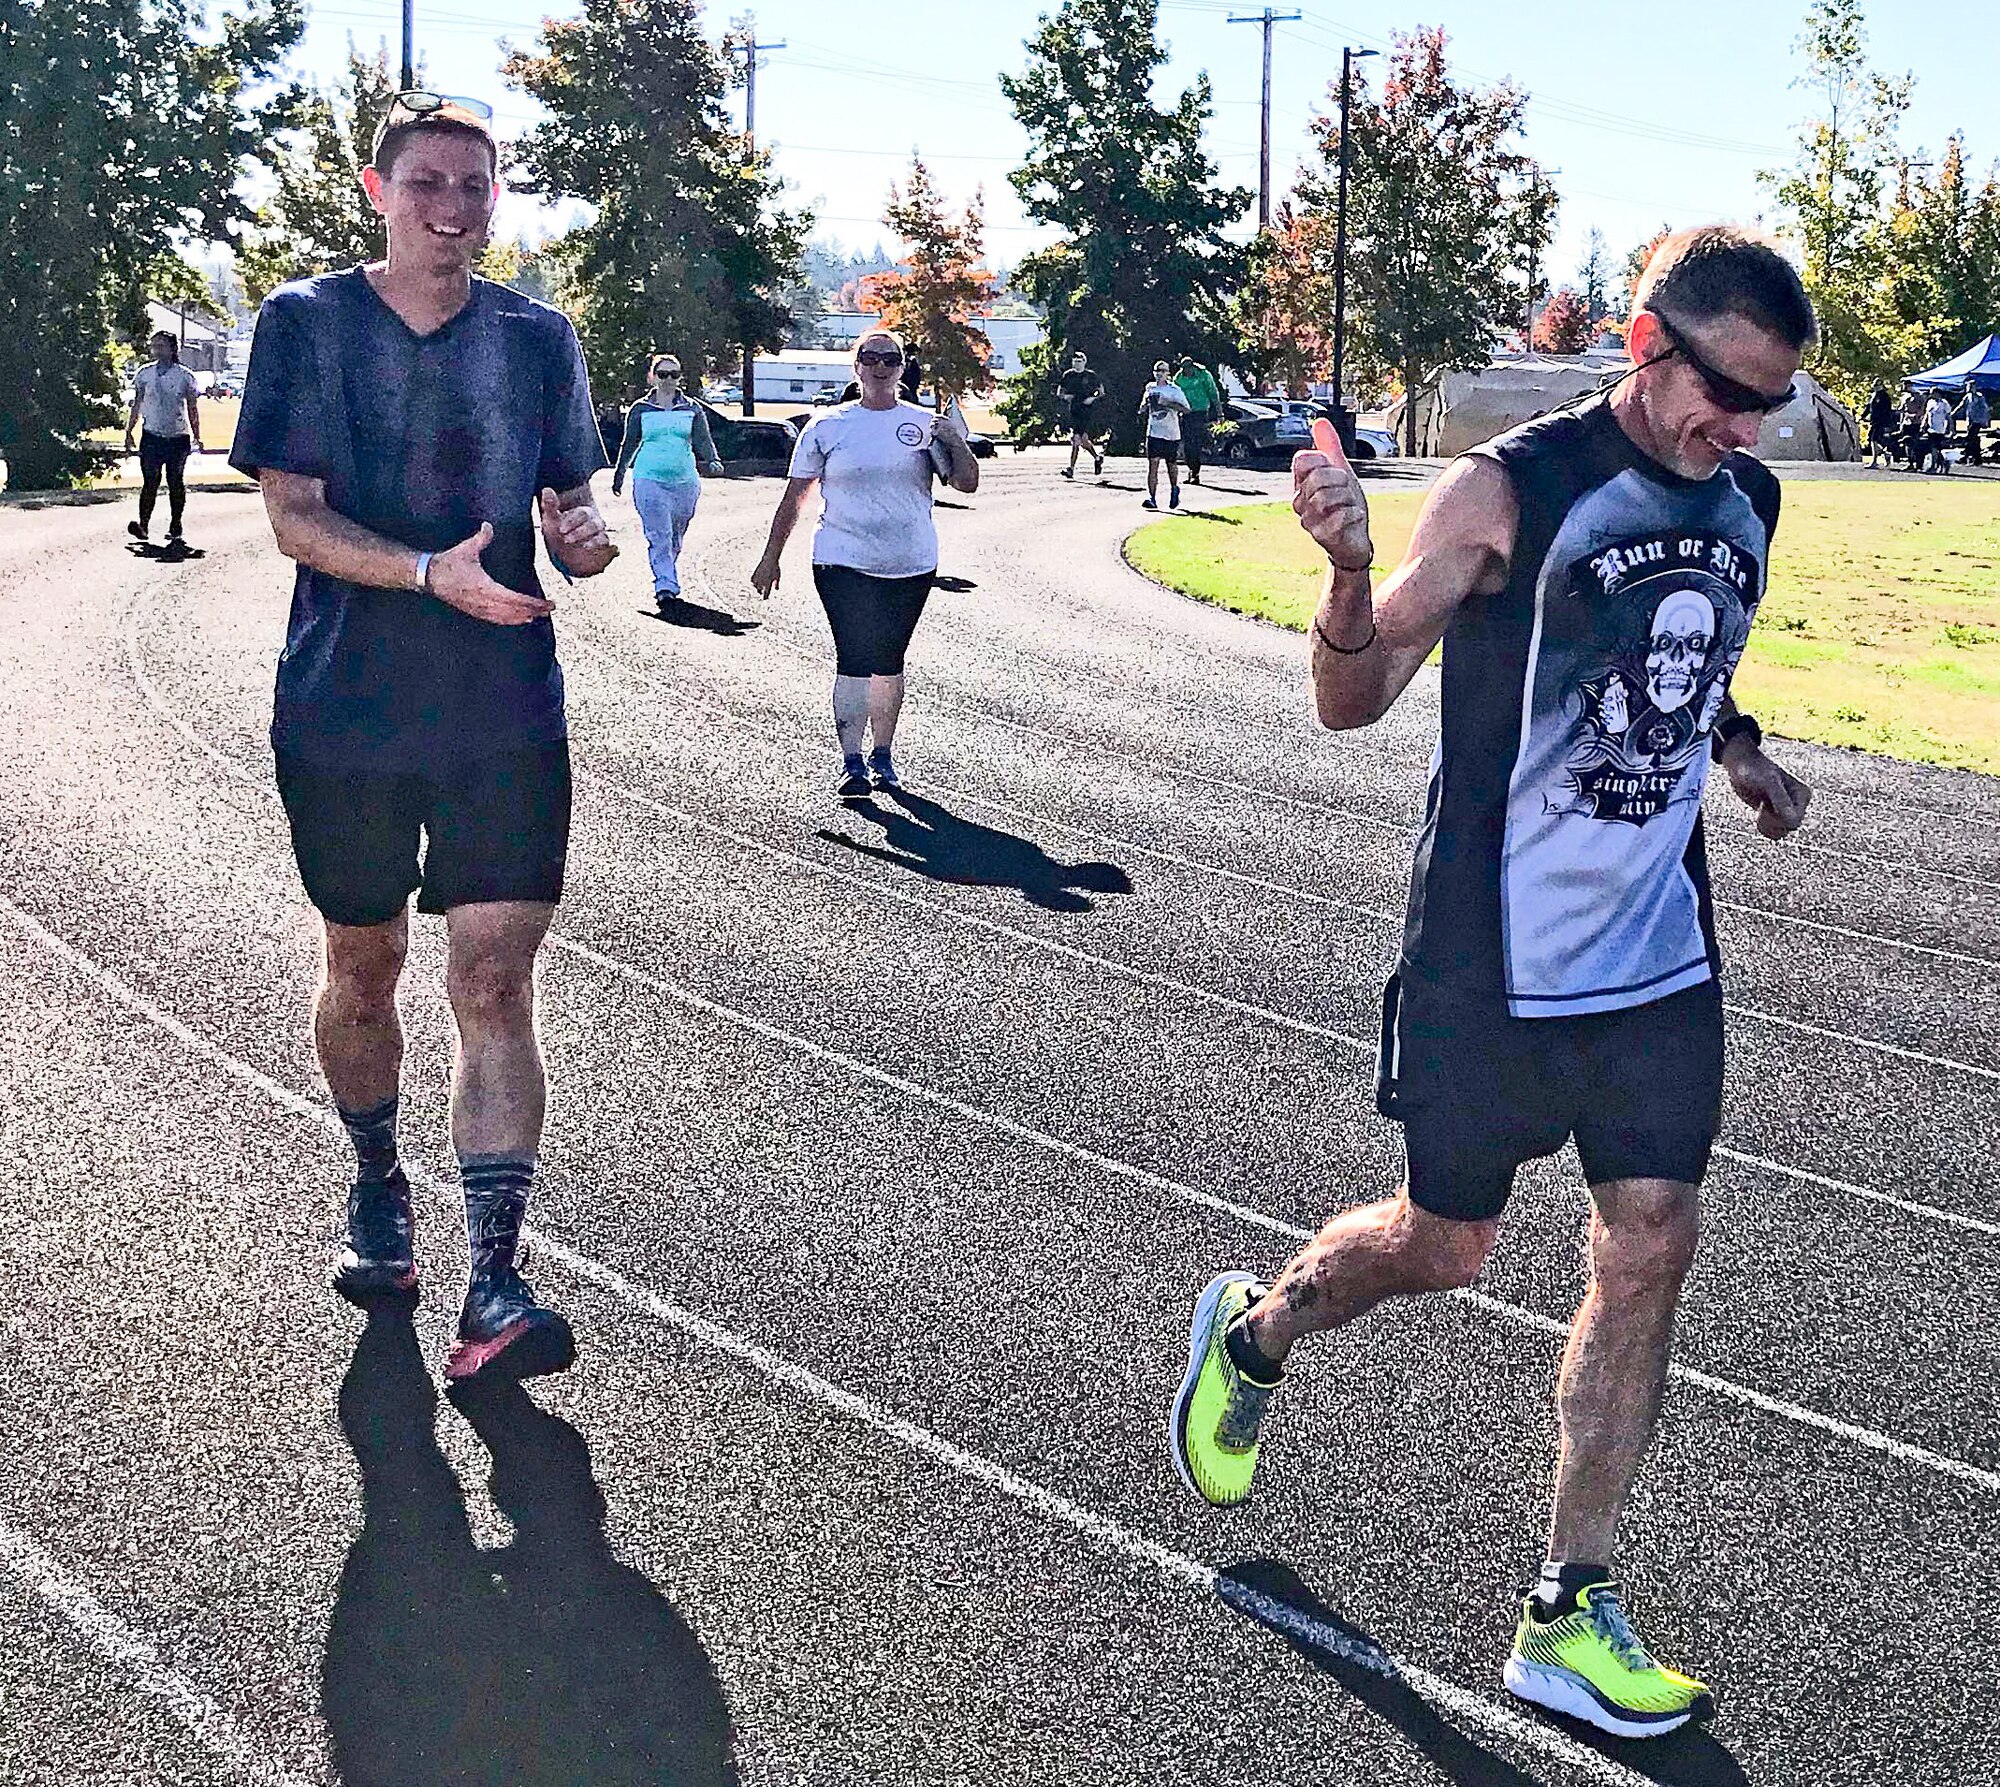 1st Lt. Krosby Keller, left, 225th Air Defense Squadron air battle manager, receives a thumbs up from running partner, Bruce Robie, right, when it was announced that Keller just completed running 100 miles during the 24-Hour POW/MIA Remembrance Run at Joint Base Lewis McChord, Washington, Sept. 19, 2018.  Keller placed first in individual standings with 100 miles and Robie finished second with 74 miles. (Courtesy photo)